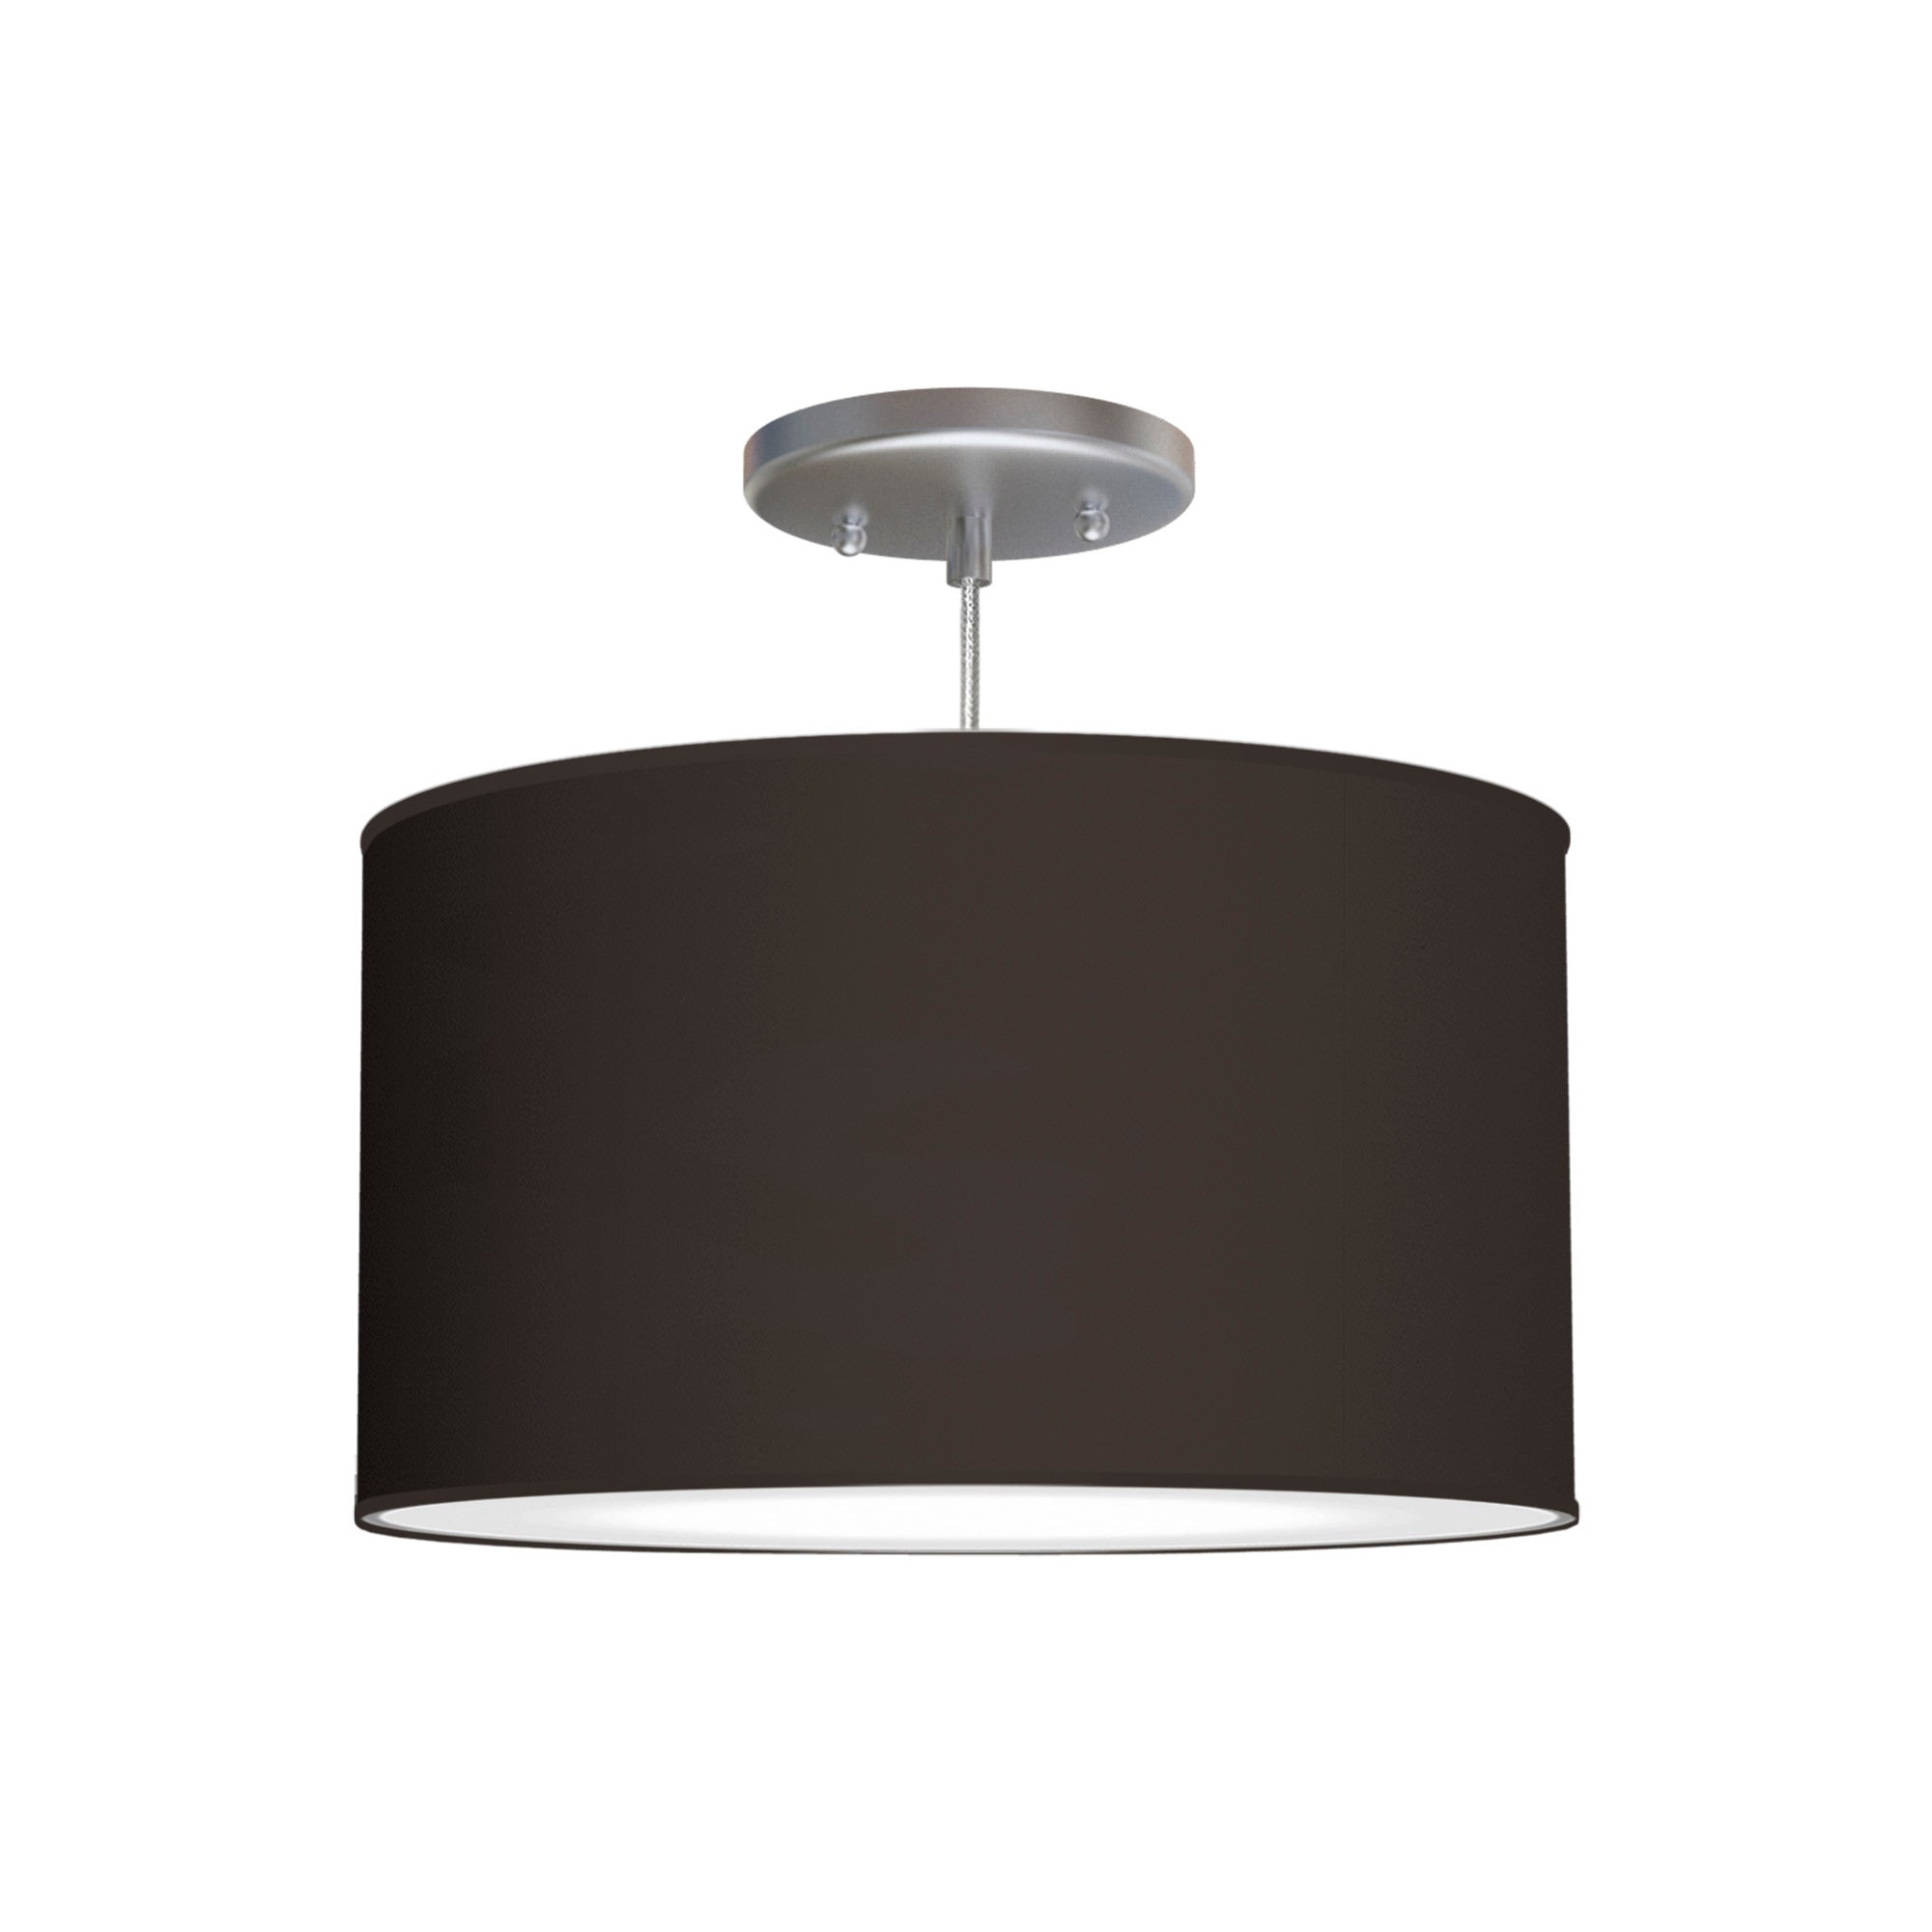 The Gab Hanging Lamp from Seascape Fixtures with a linen shade in black color.